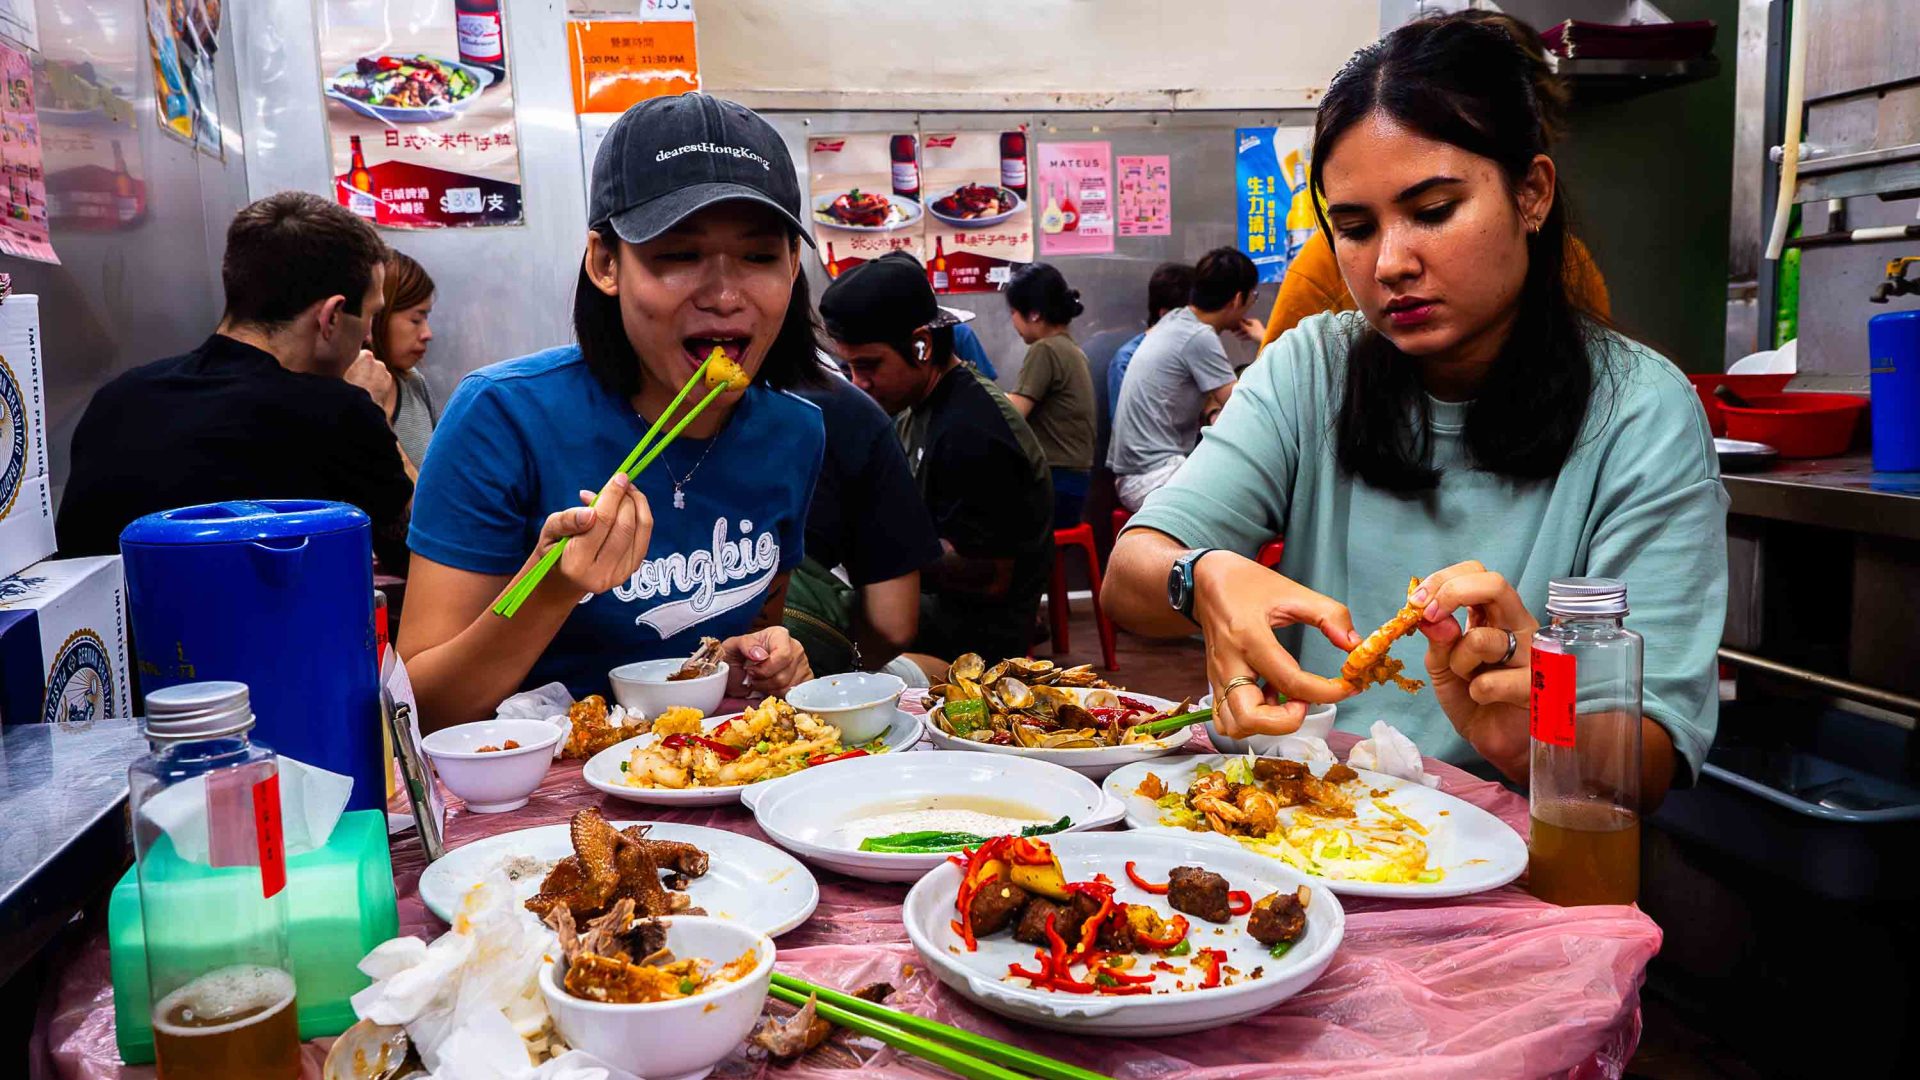 Two women eat with chopsticks at a crowded restaurant. Dishes on the table are half eaten.